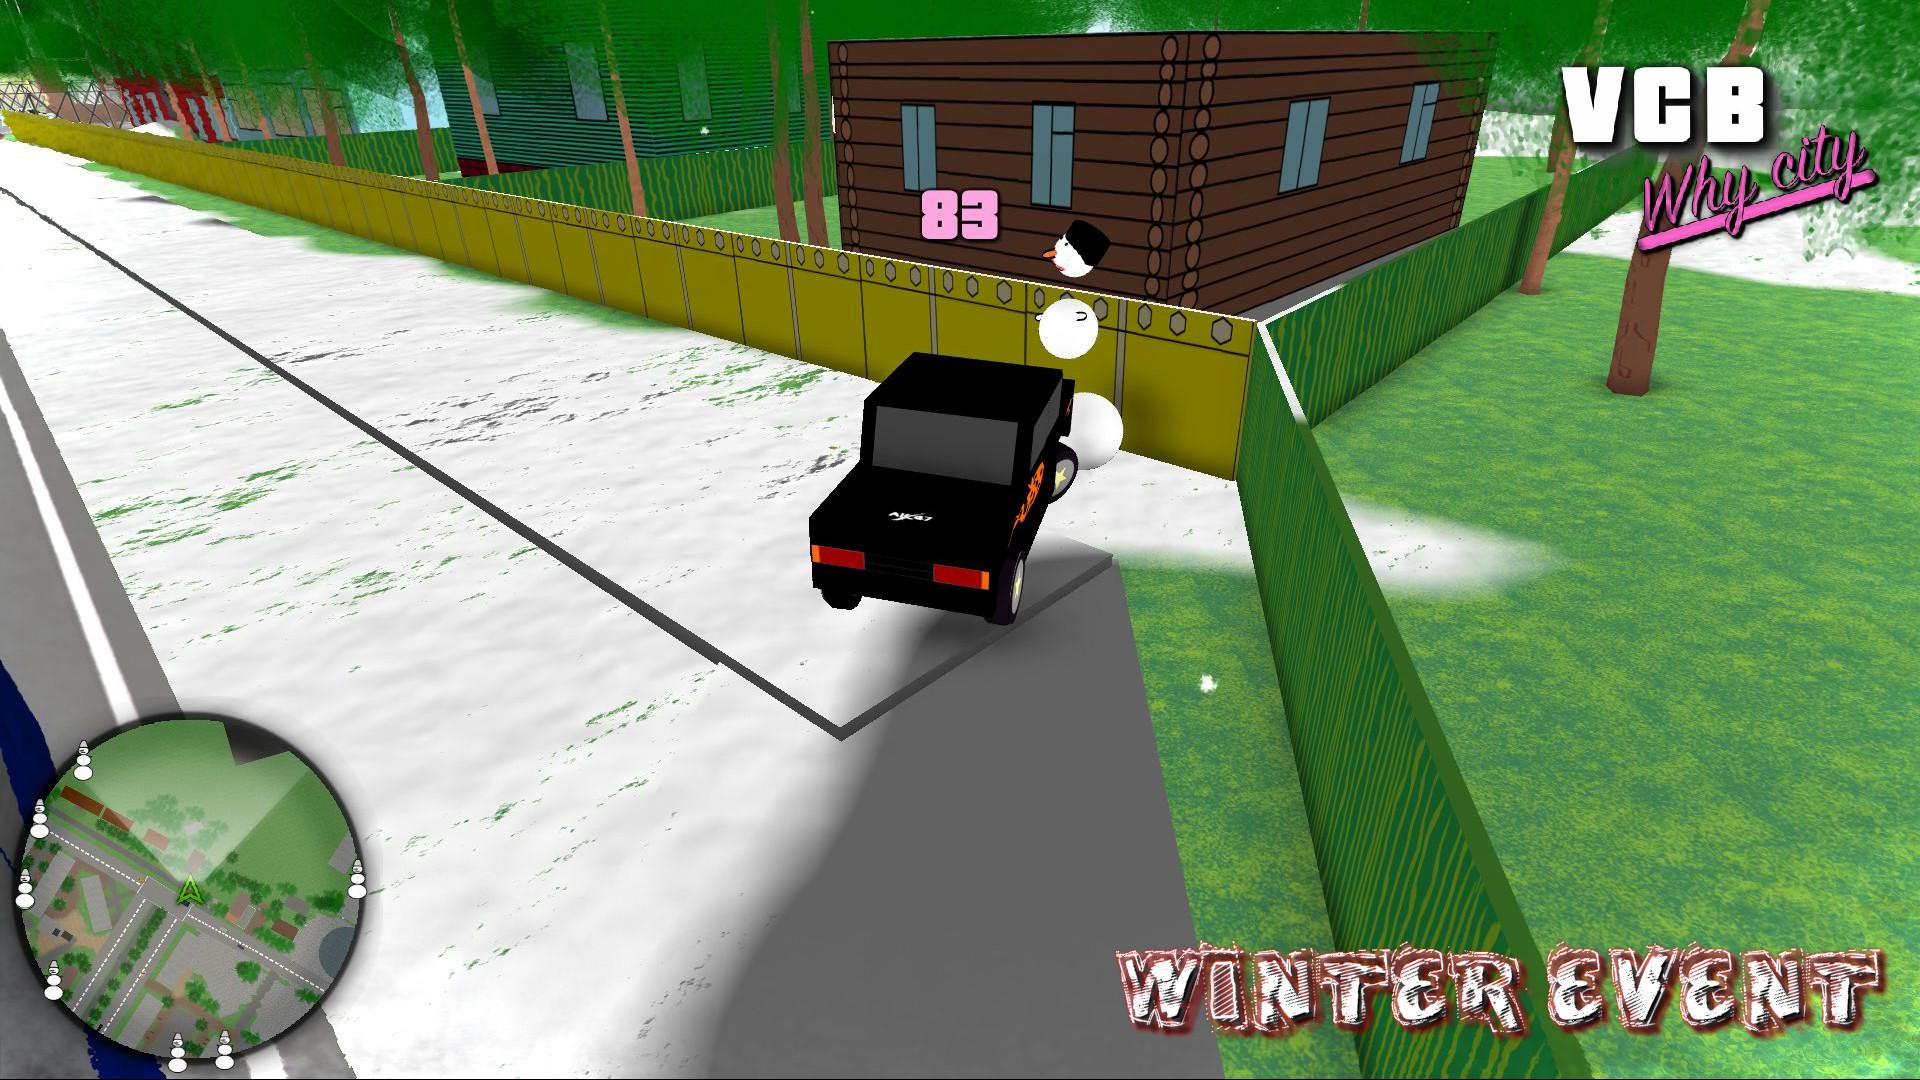 Screenshot №5 from game VCB: Why City (Beta Version)